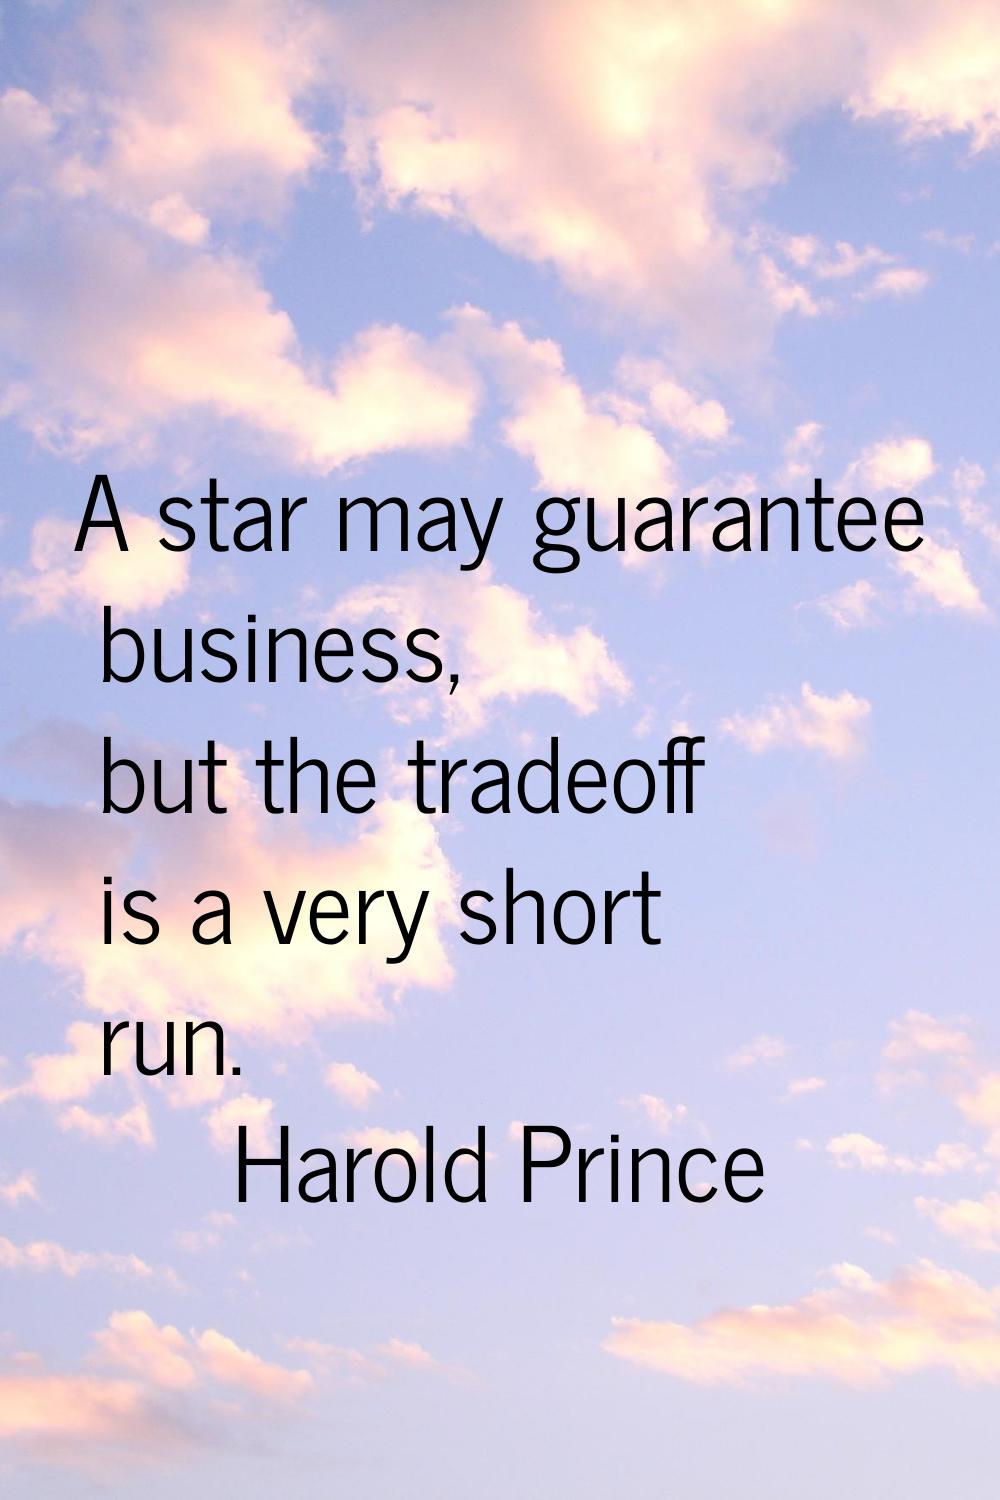 A star may guarantee business, but the tradeoff is a very short run.